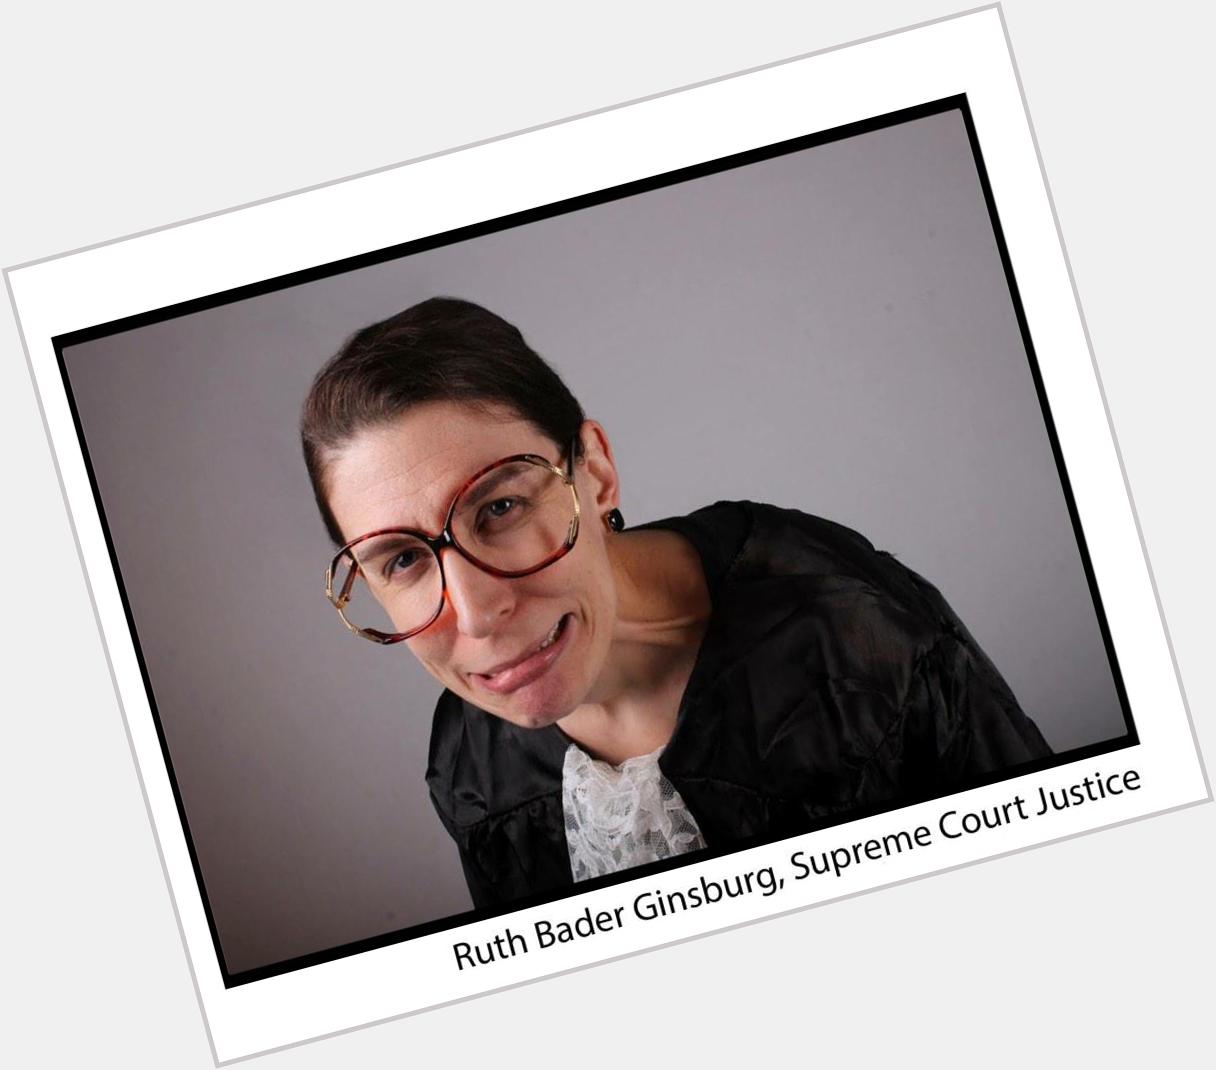  Today is Ruth Bader Ginsburg\s birthday! Let\s wish her a happy 82nd birthday. 